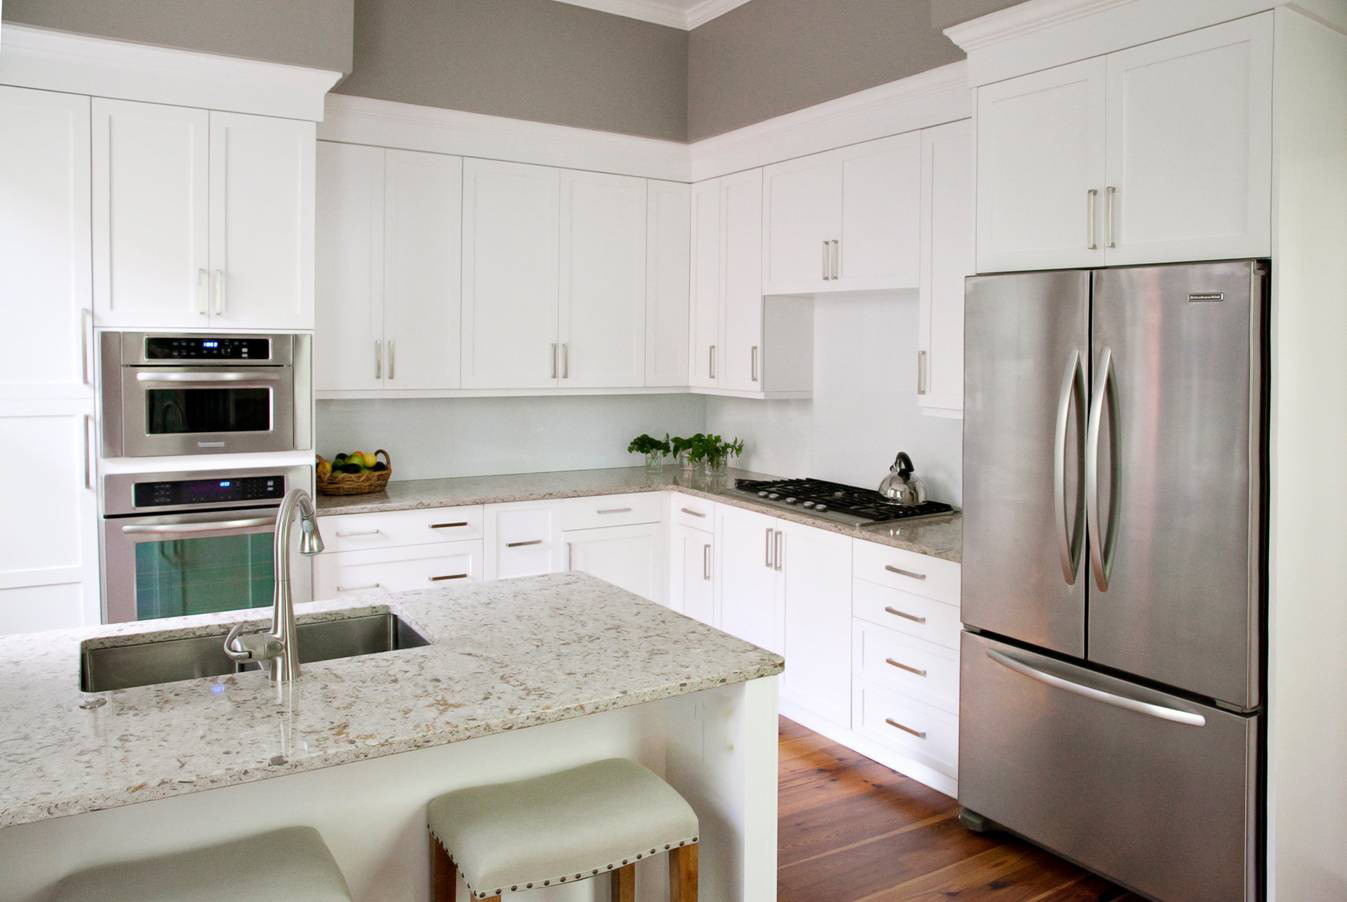 Most Popular Kitchen Cabinets
 Most Popular Kitchen Cabinet Colors in 2019